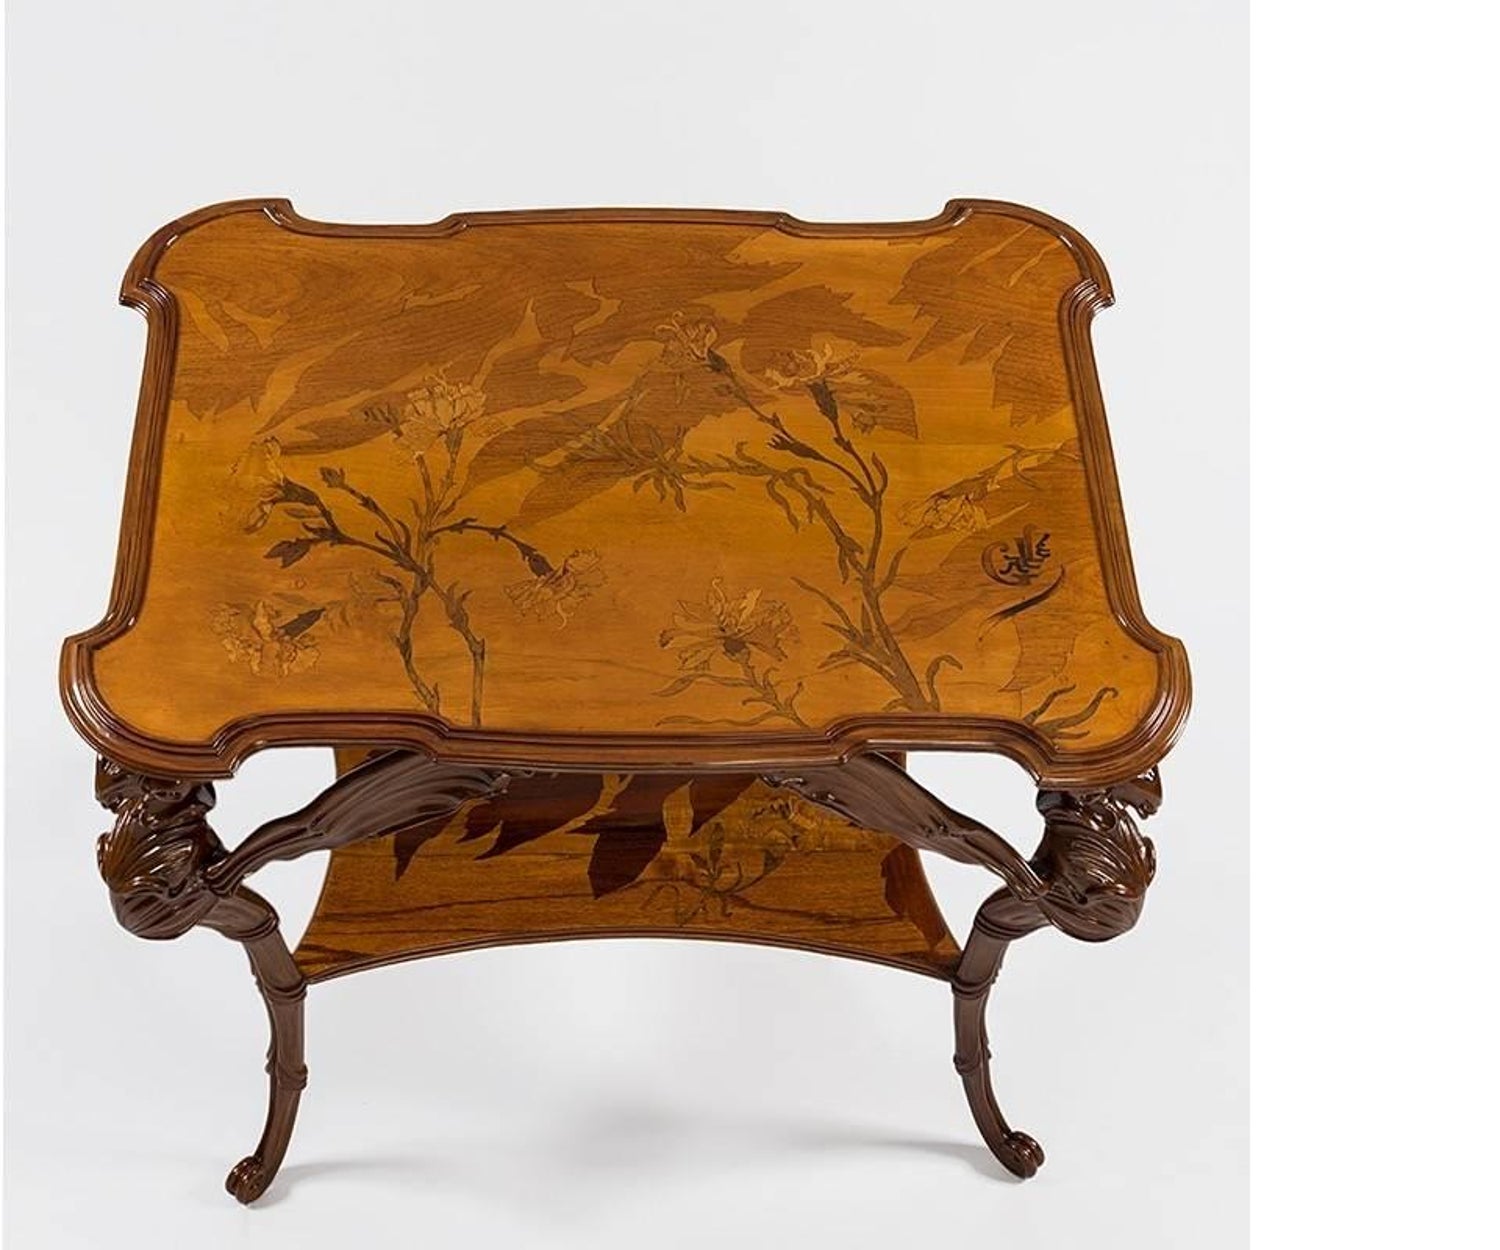 French Art Nouveau Dragonfly Table by Émile Gallé at 1stDibs